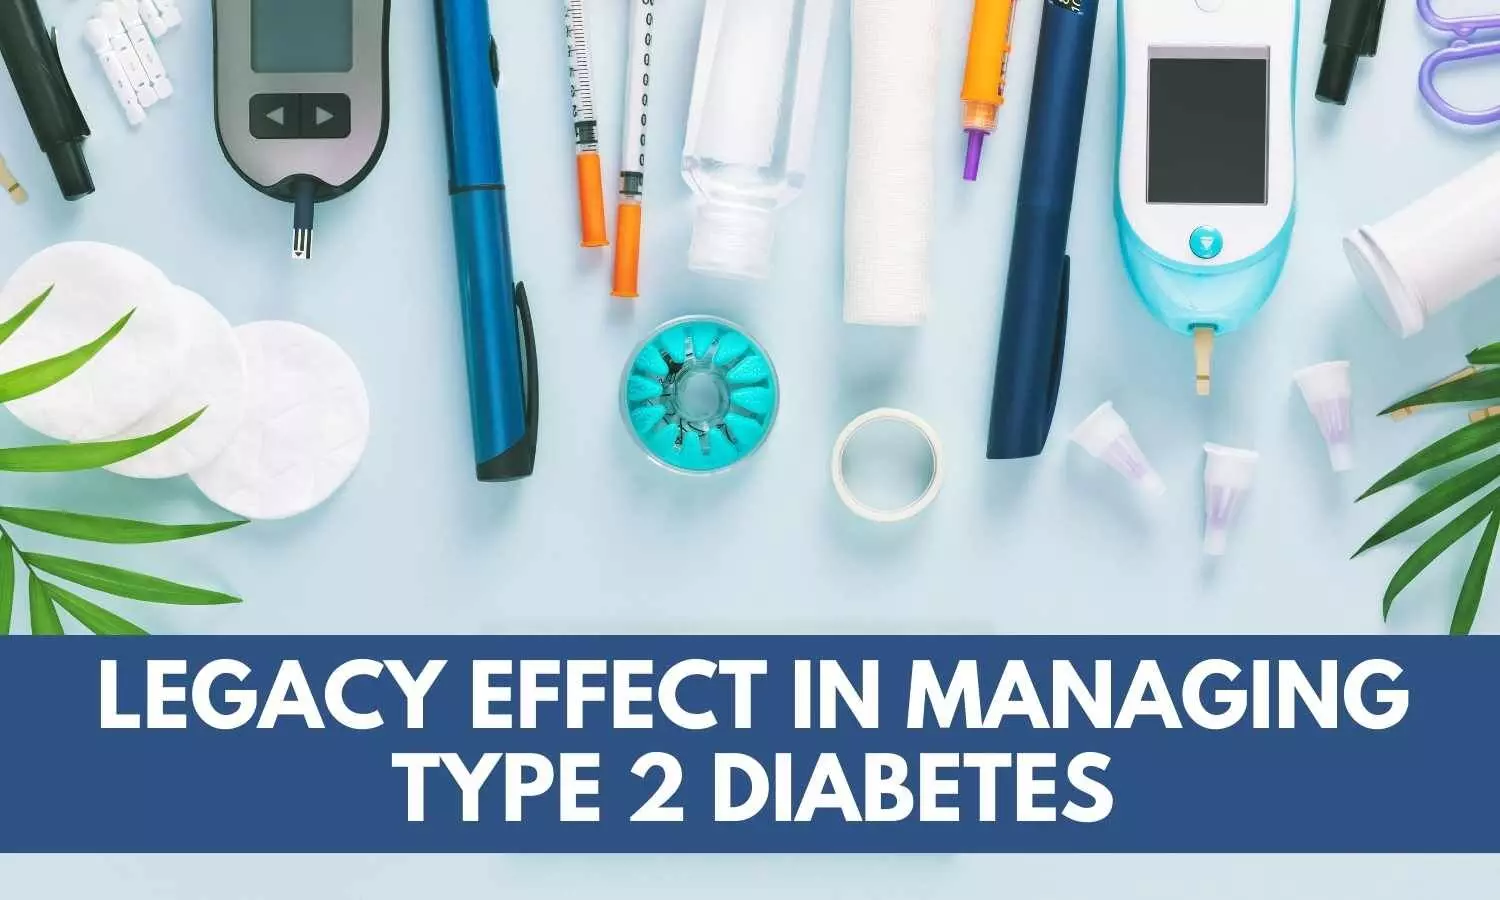 Indian Review Revisits Legacy Effect of Gliclazide  in Diabetes Management